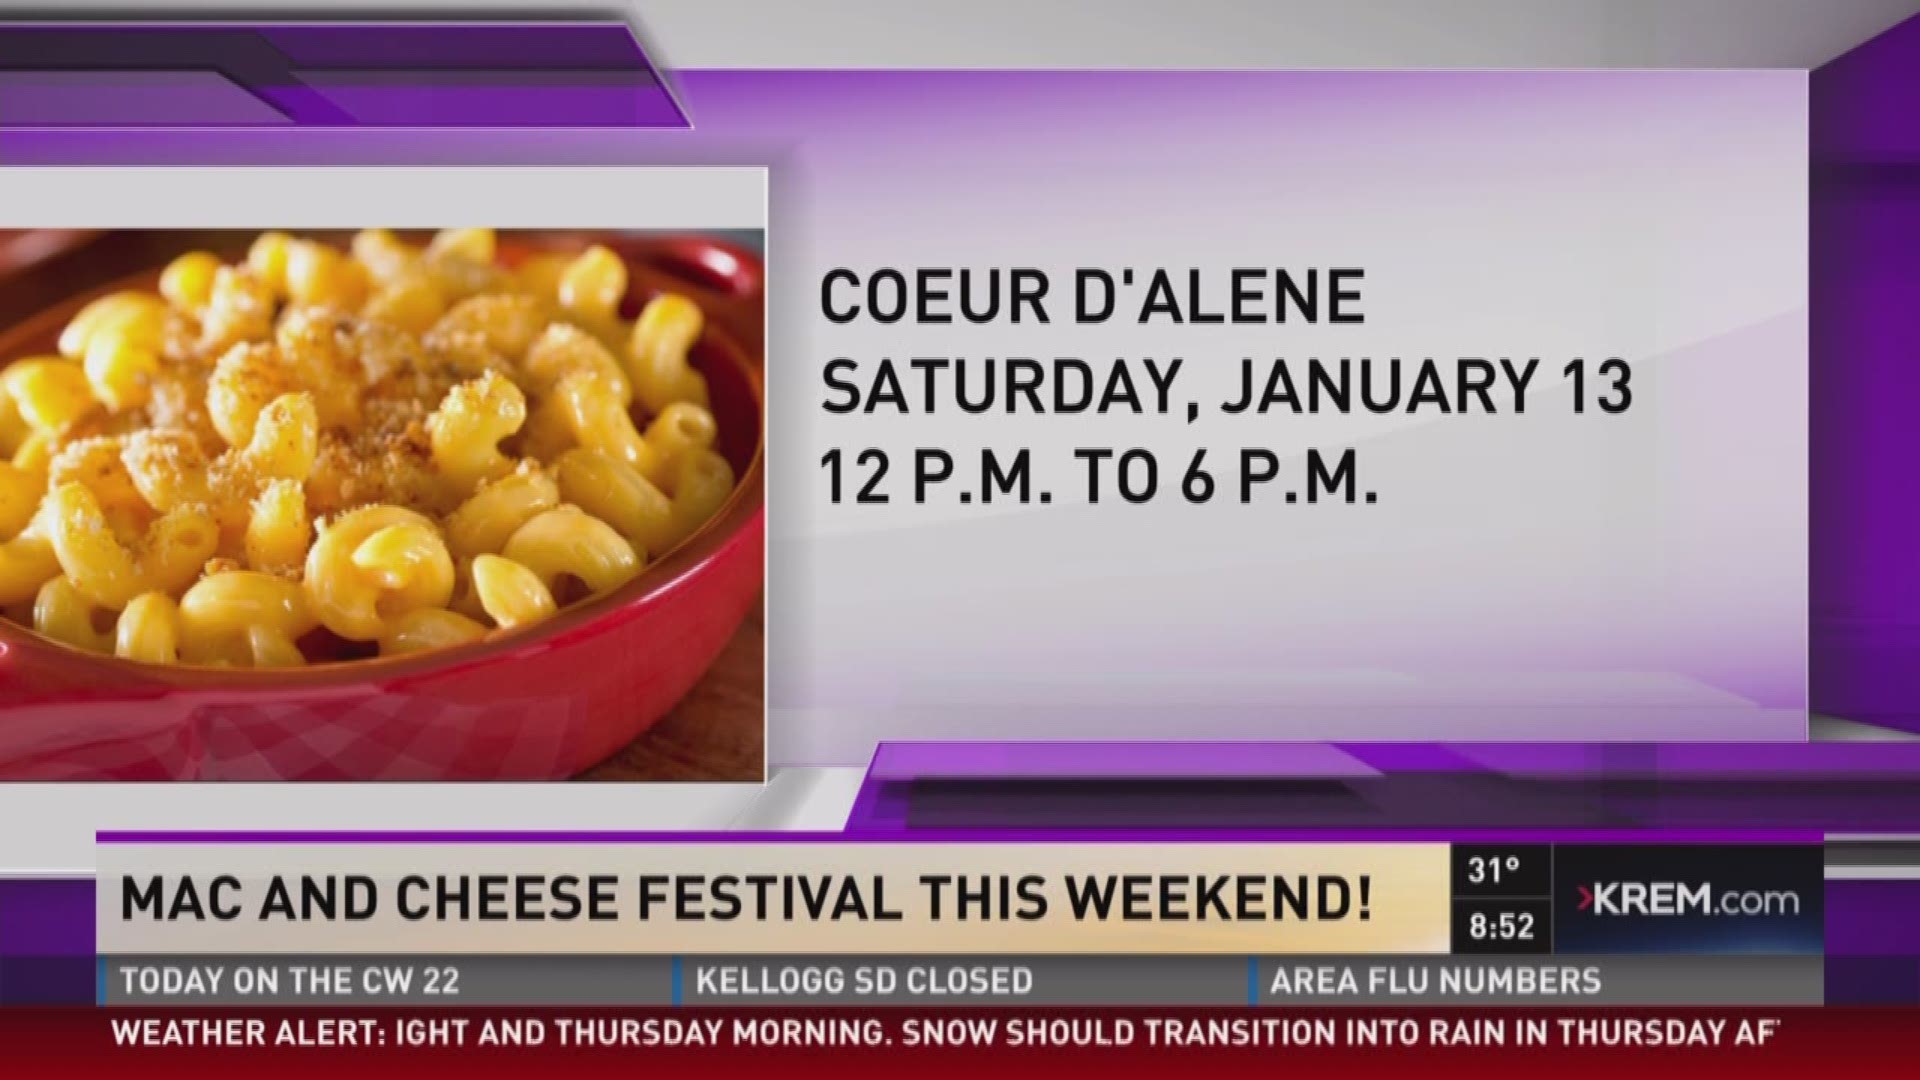 Mac and Cheese Festival comes to Coeur d'Alene in January